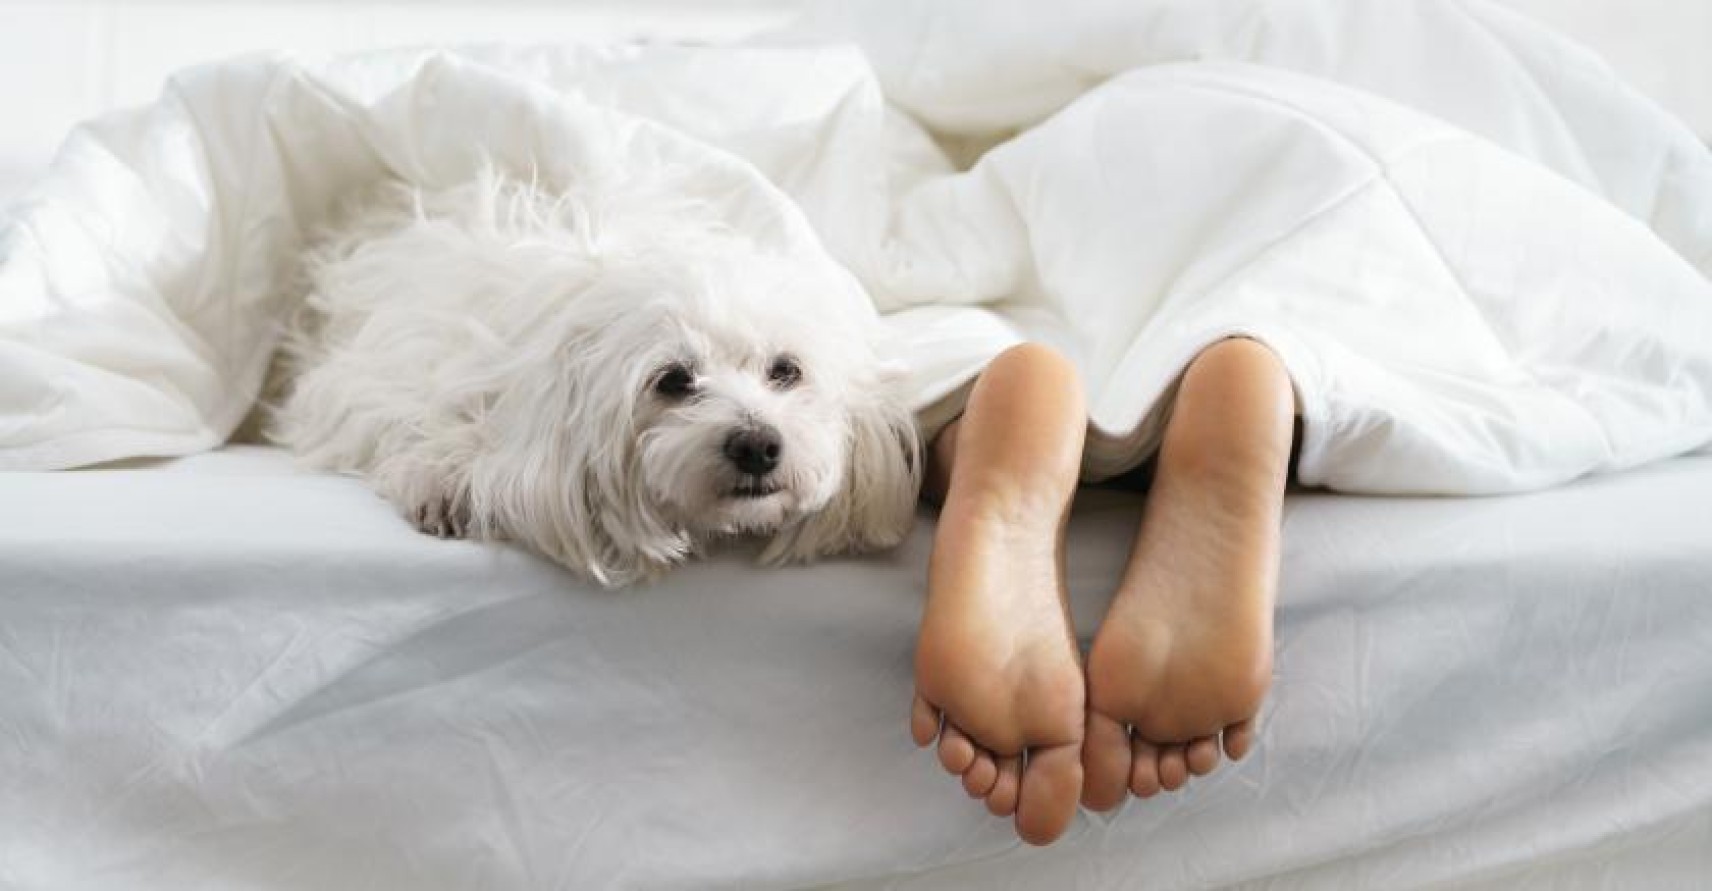 dog lying on a bed next to a person's feet